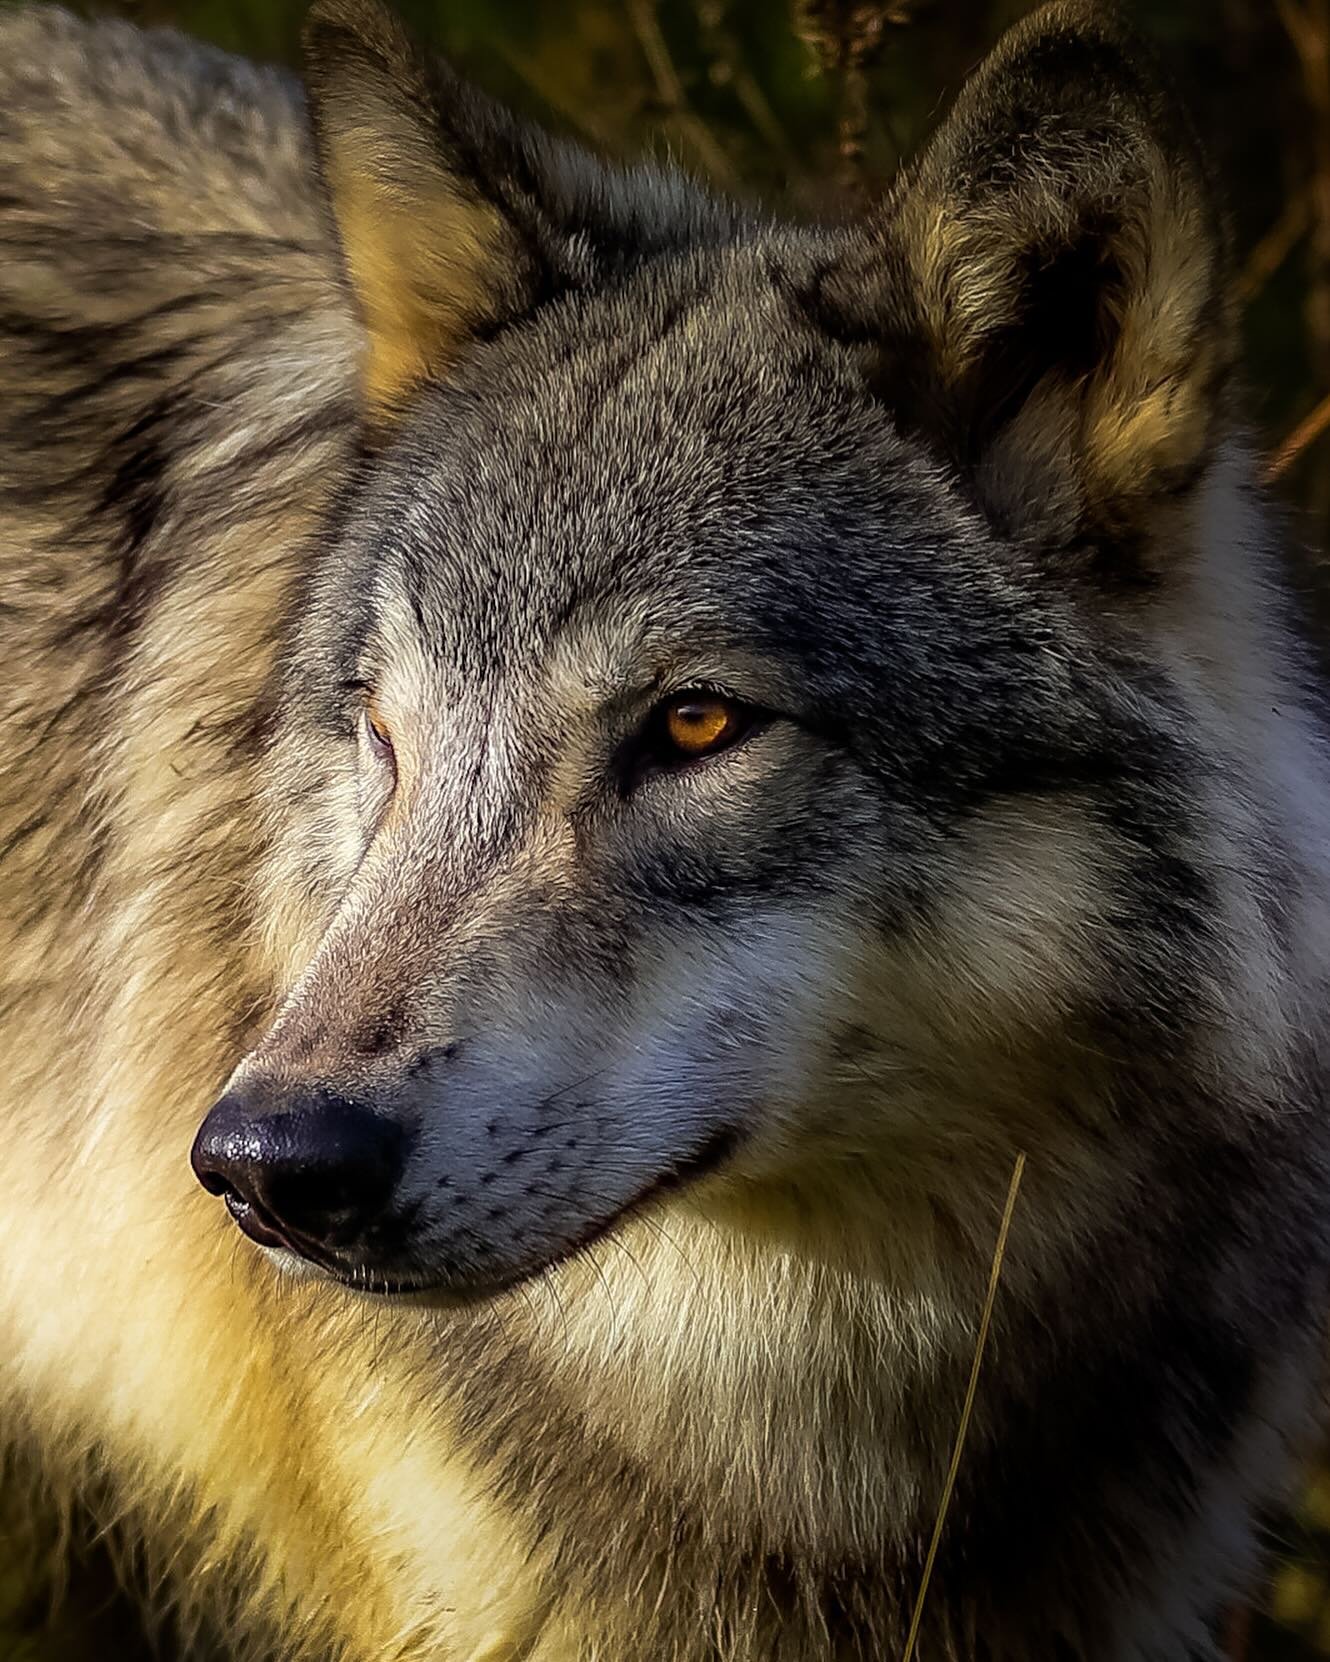 Keep your voices loud , pressure Wyoming to change its laws &hellip;pressure them to bring Cody Roberts to justice.. Wolves need our voices to protect them.. To many have gone silent on this.. To many &ldquo; wildlife photographers&rdquo; have never 